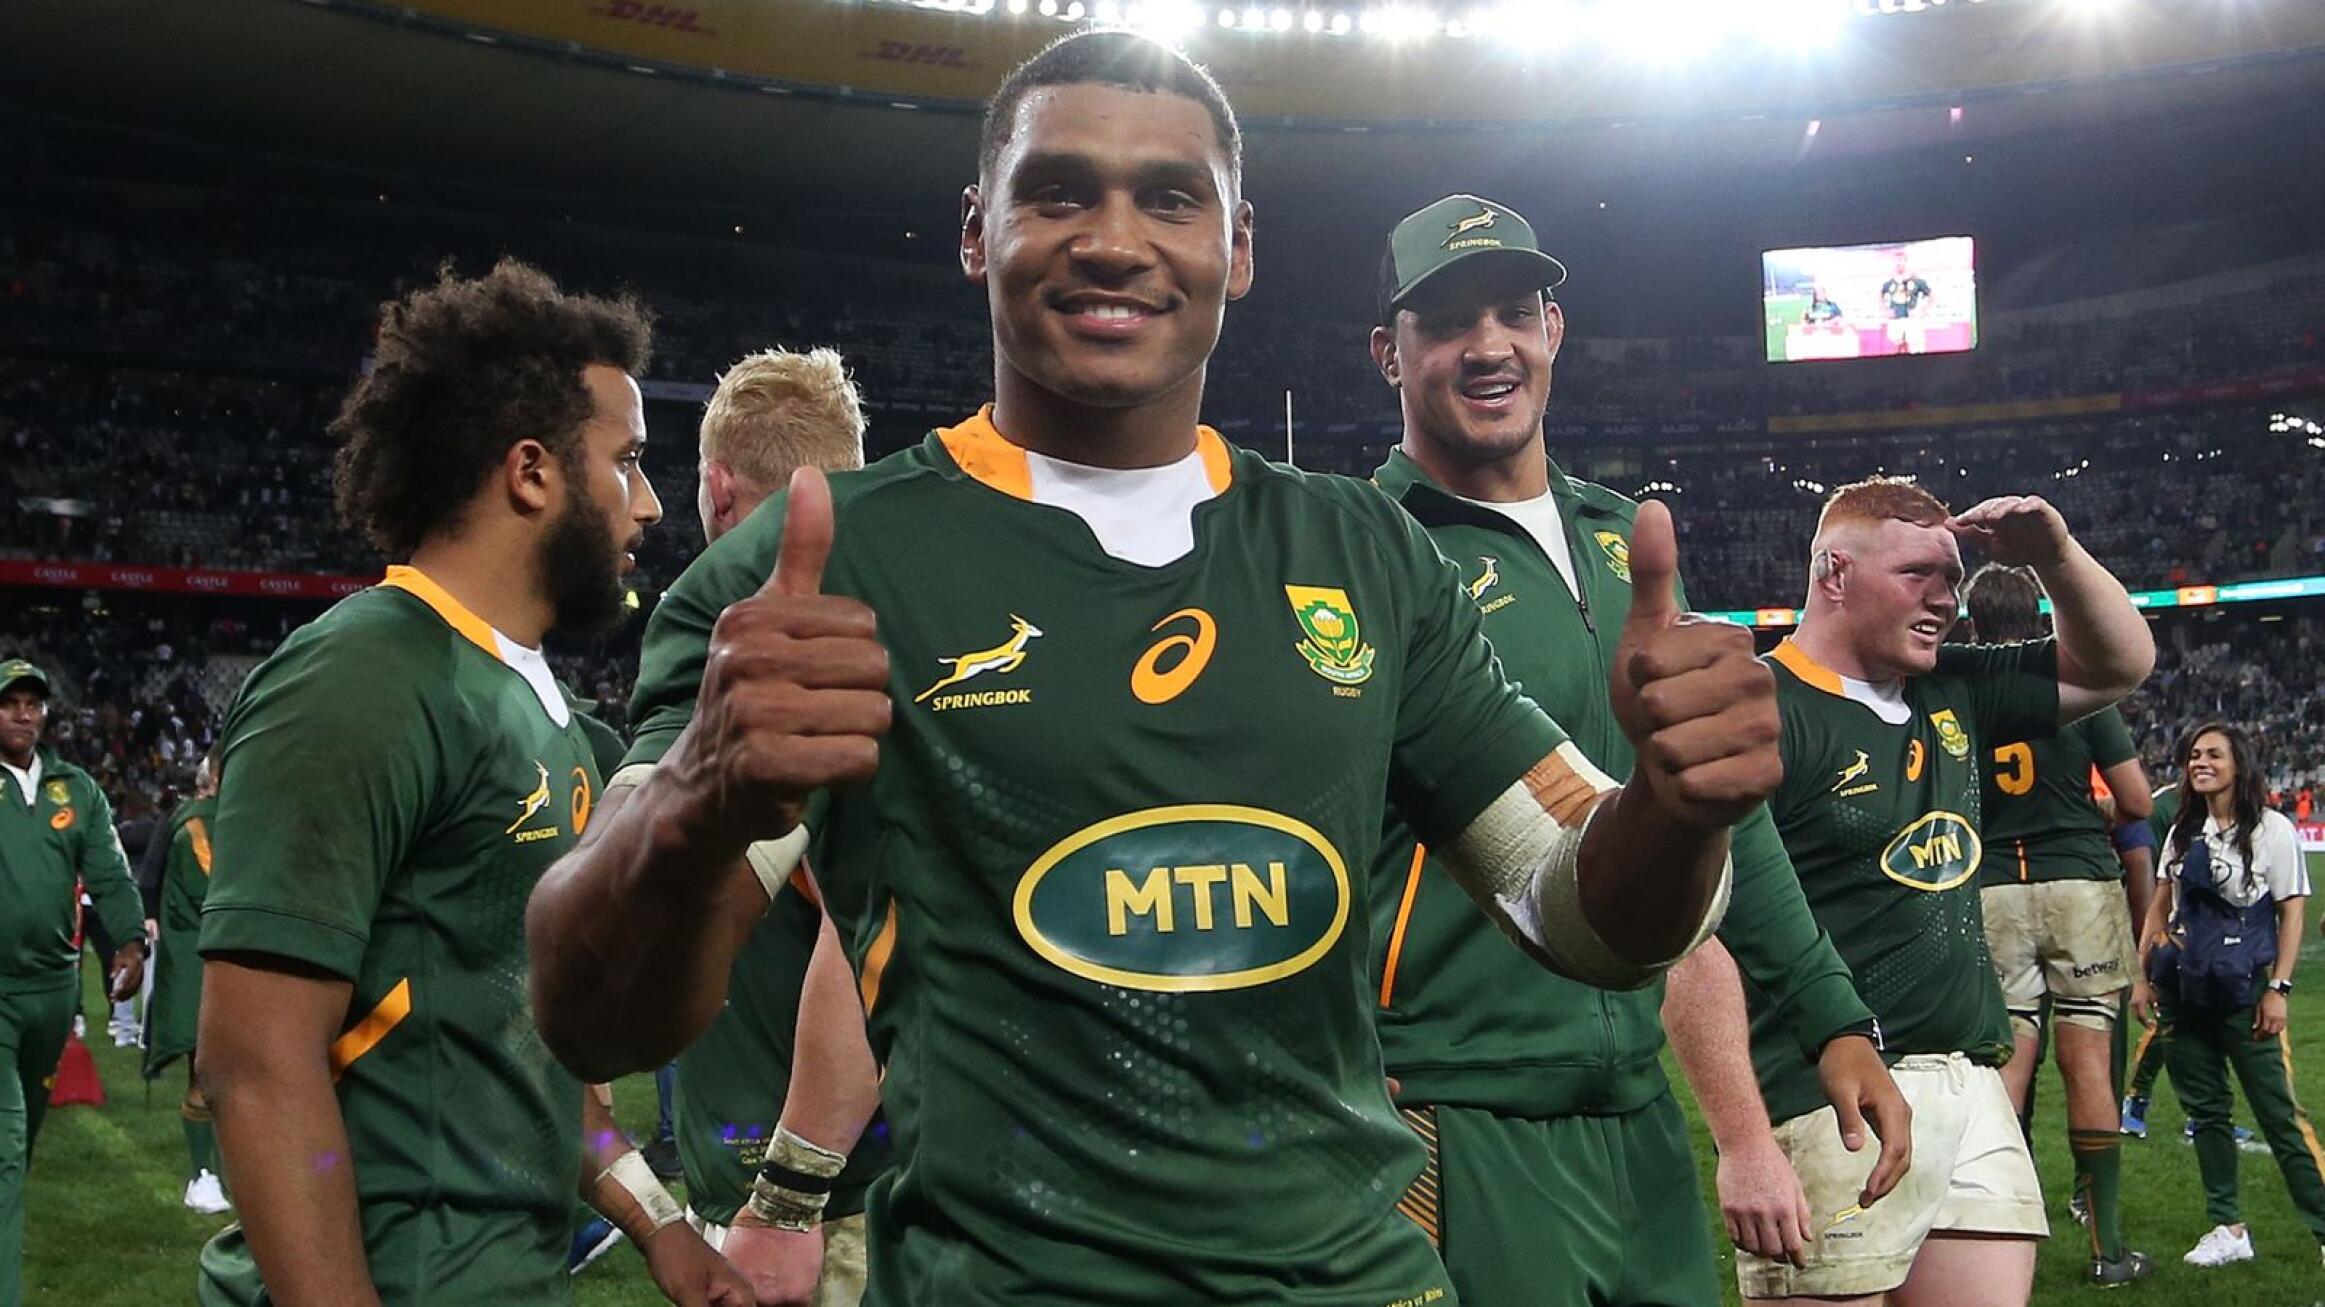 The Springboks will be hoping Damian Willemse can replicate his form from the series against Wales when they take on the All Blacks